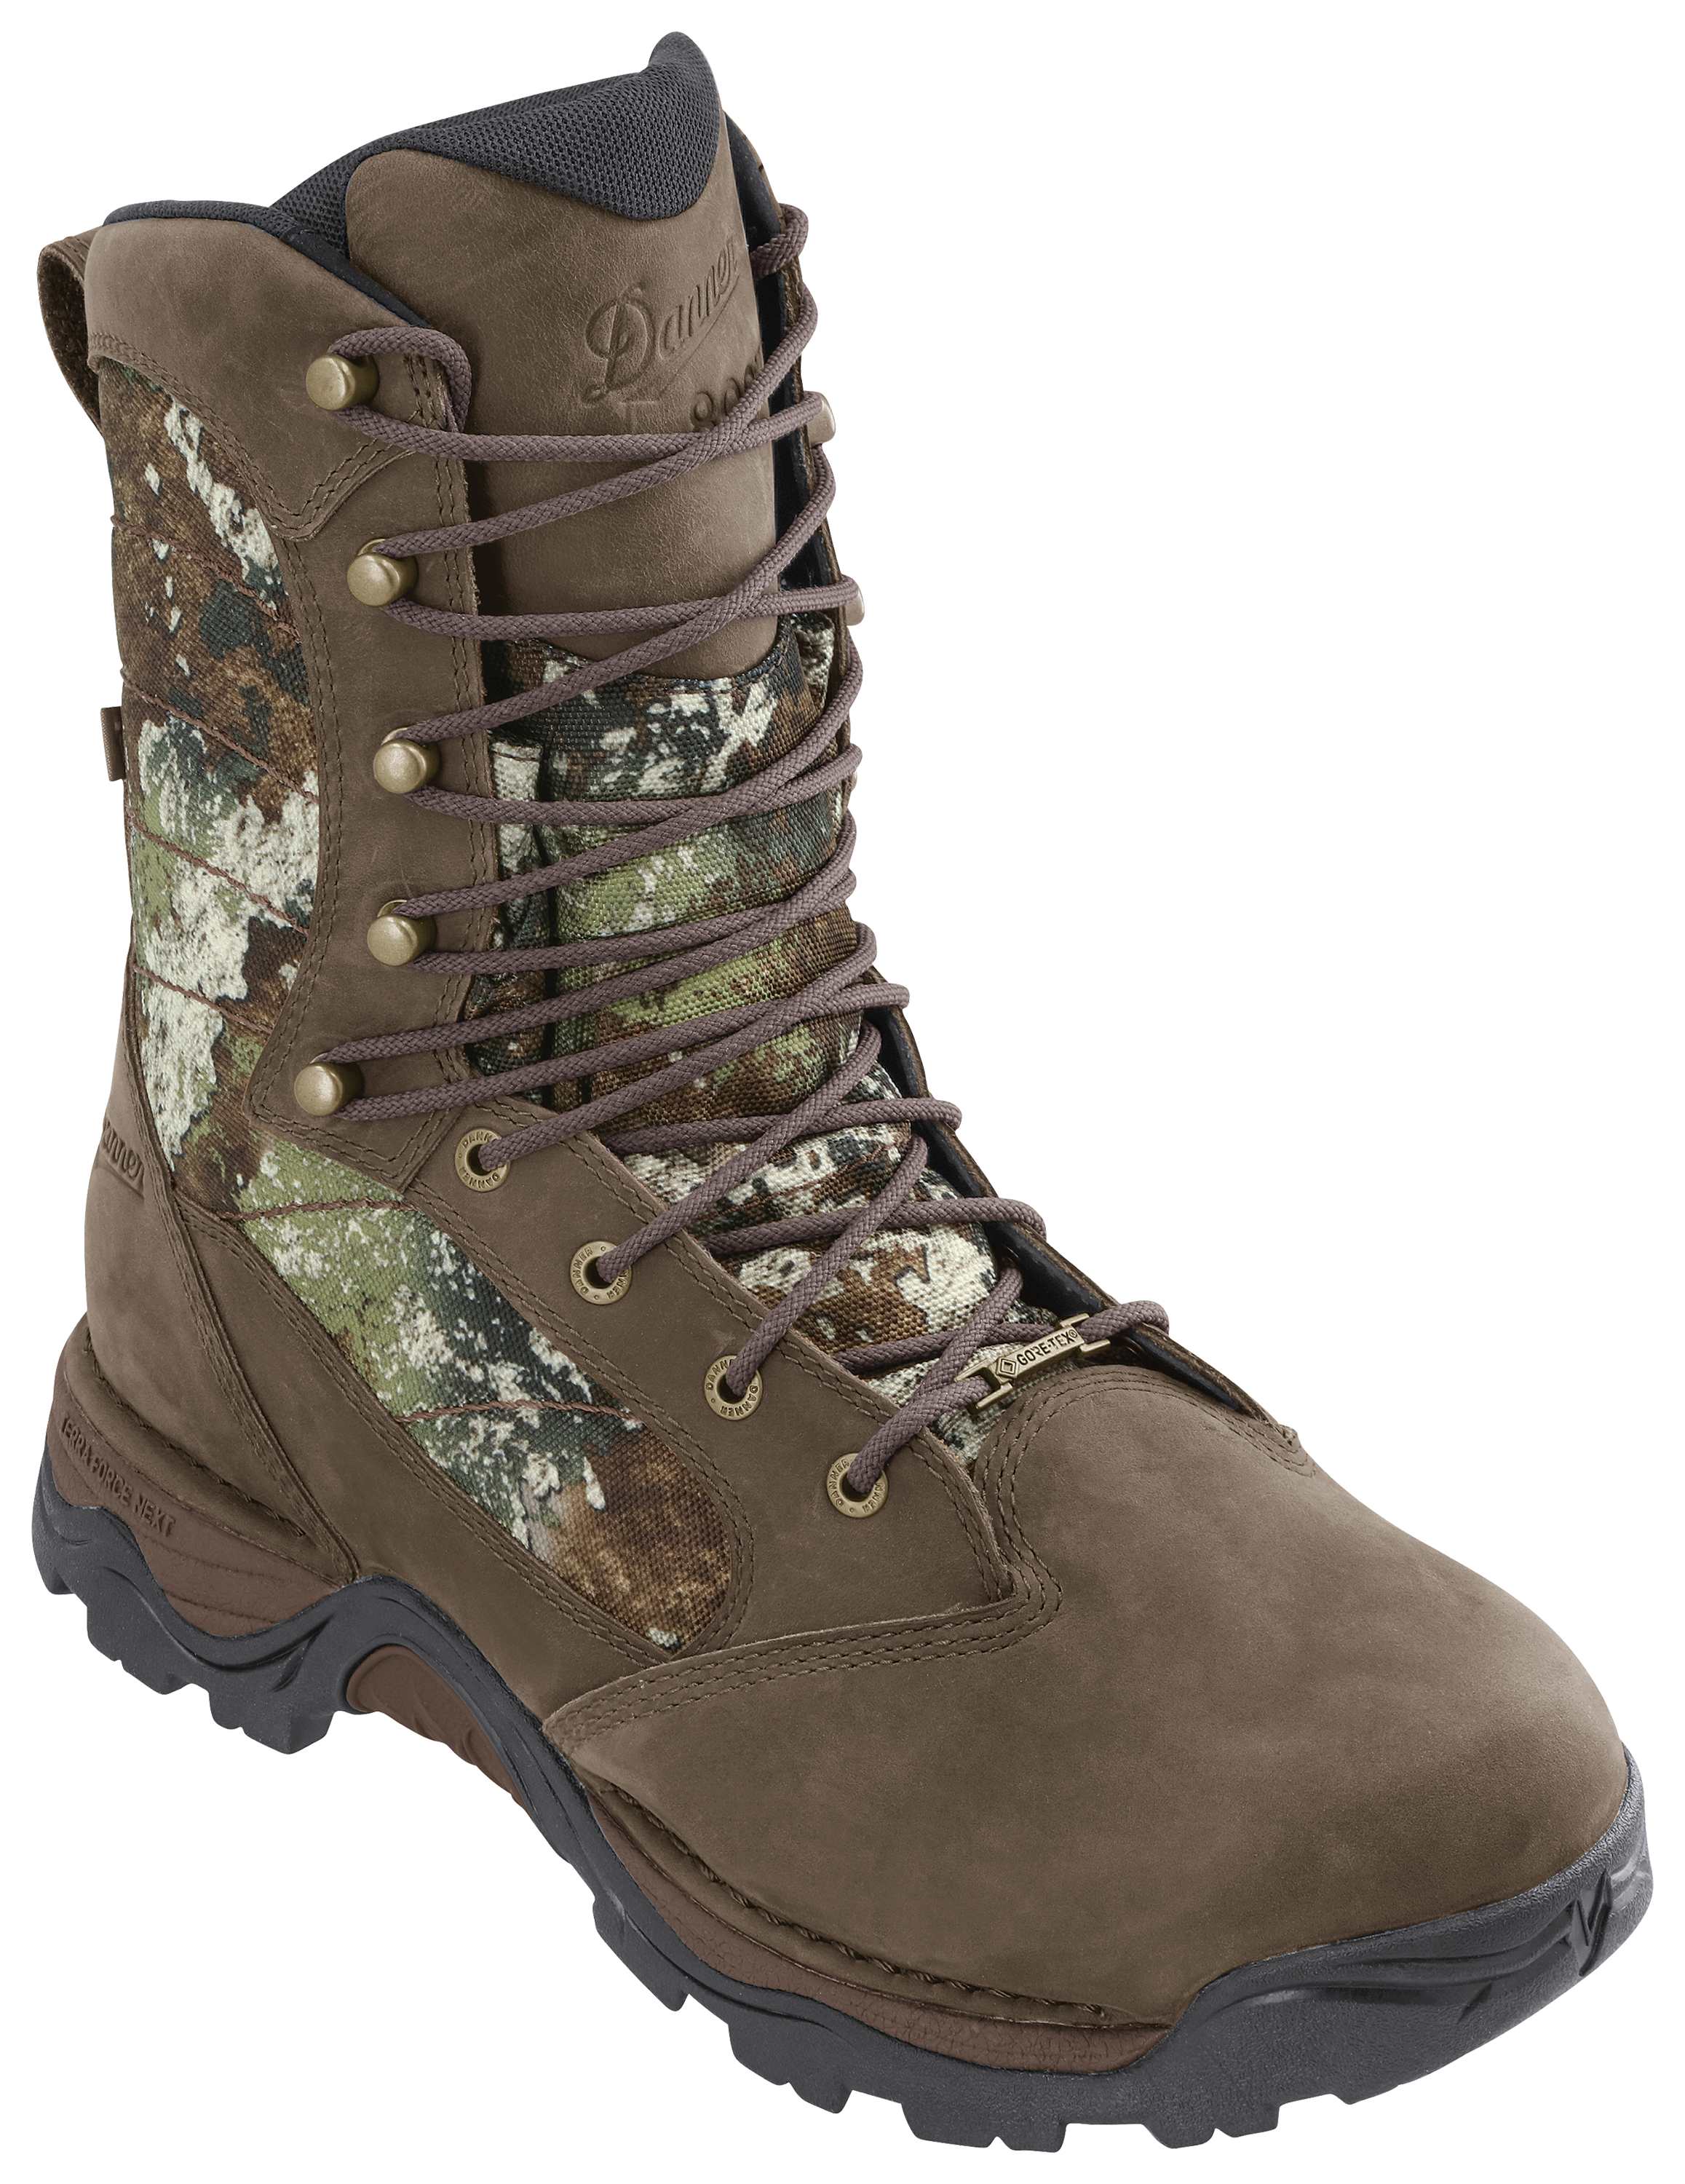 Danner Pronghorn 800 TrueTimber Strata Insulated GORE-TEX Hunting Boots for Men